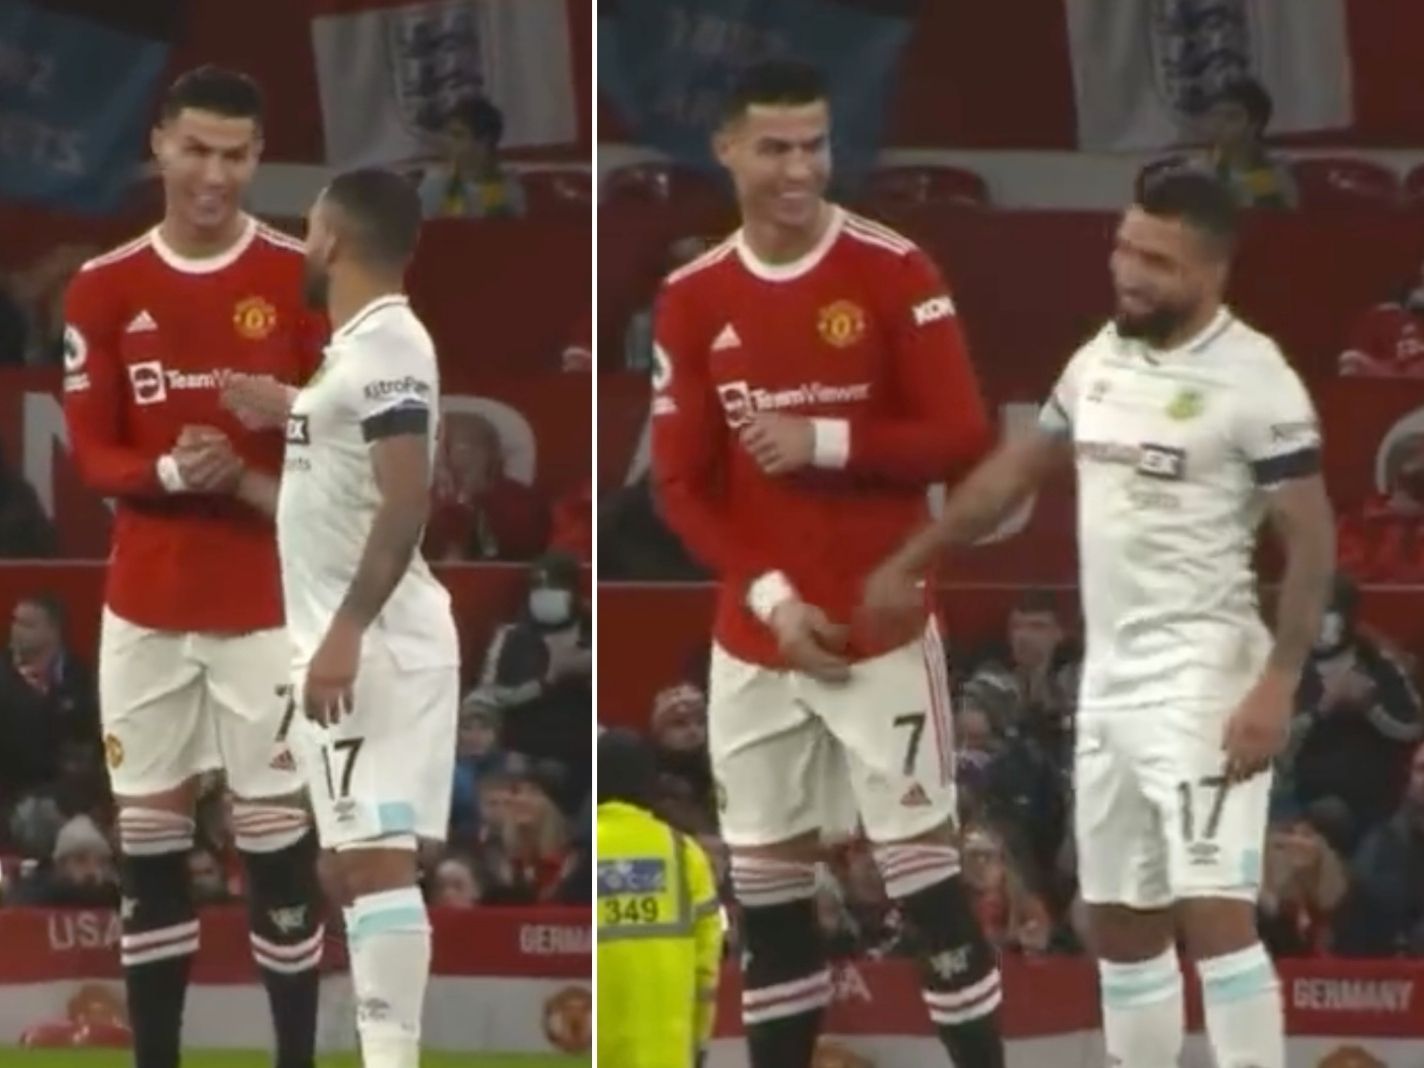 This moment between Cristiano Ronaldo and Aaron Lennon has fans nostalgic